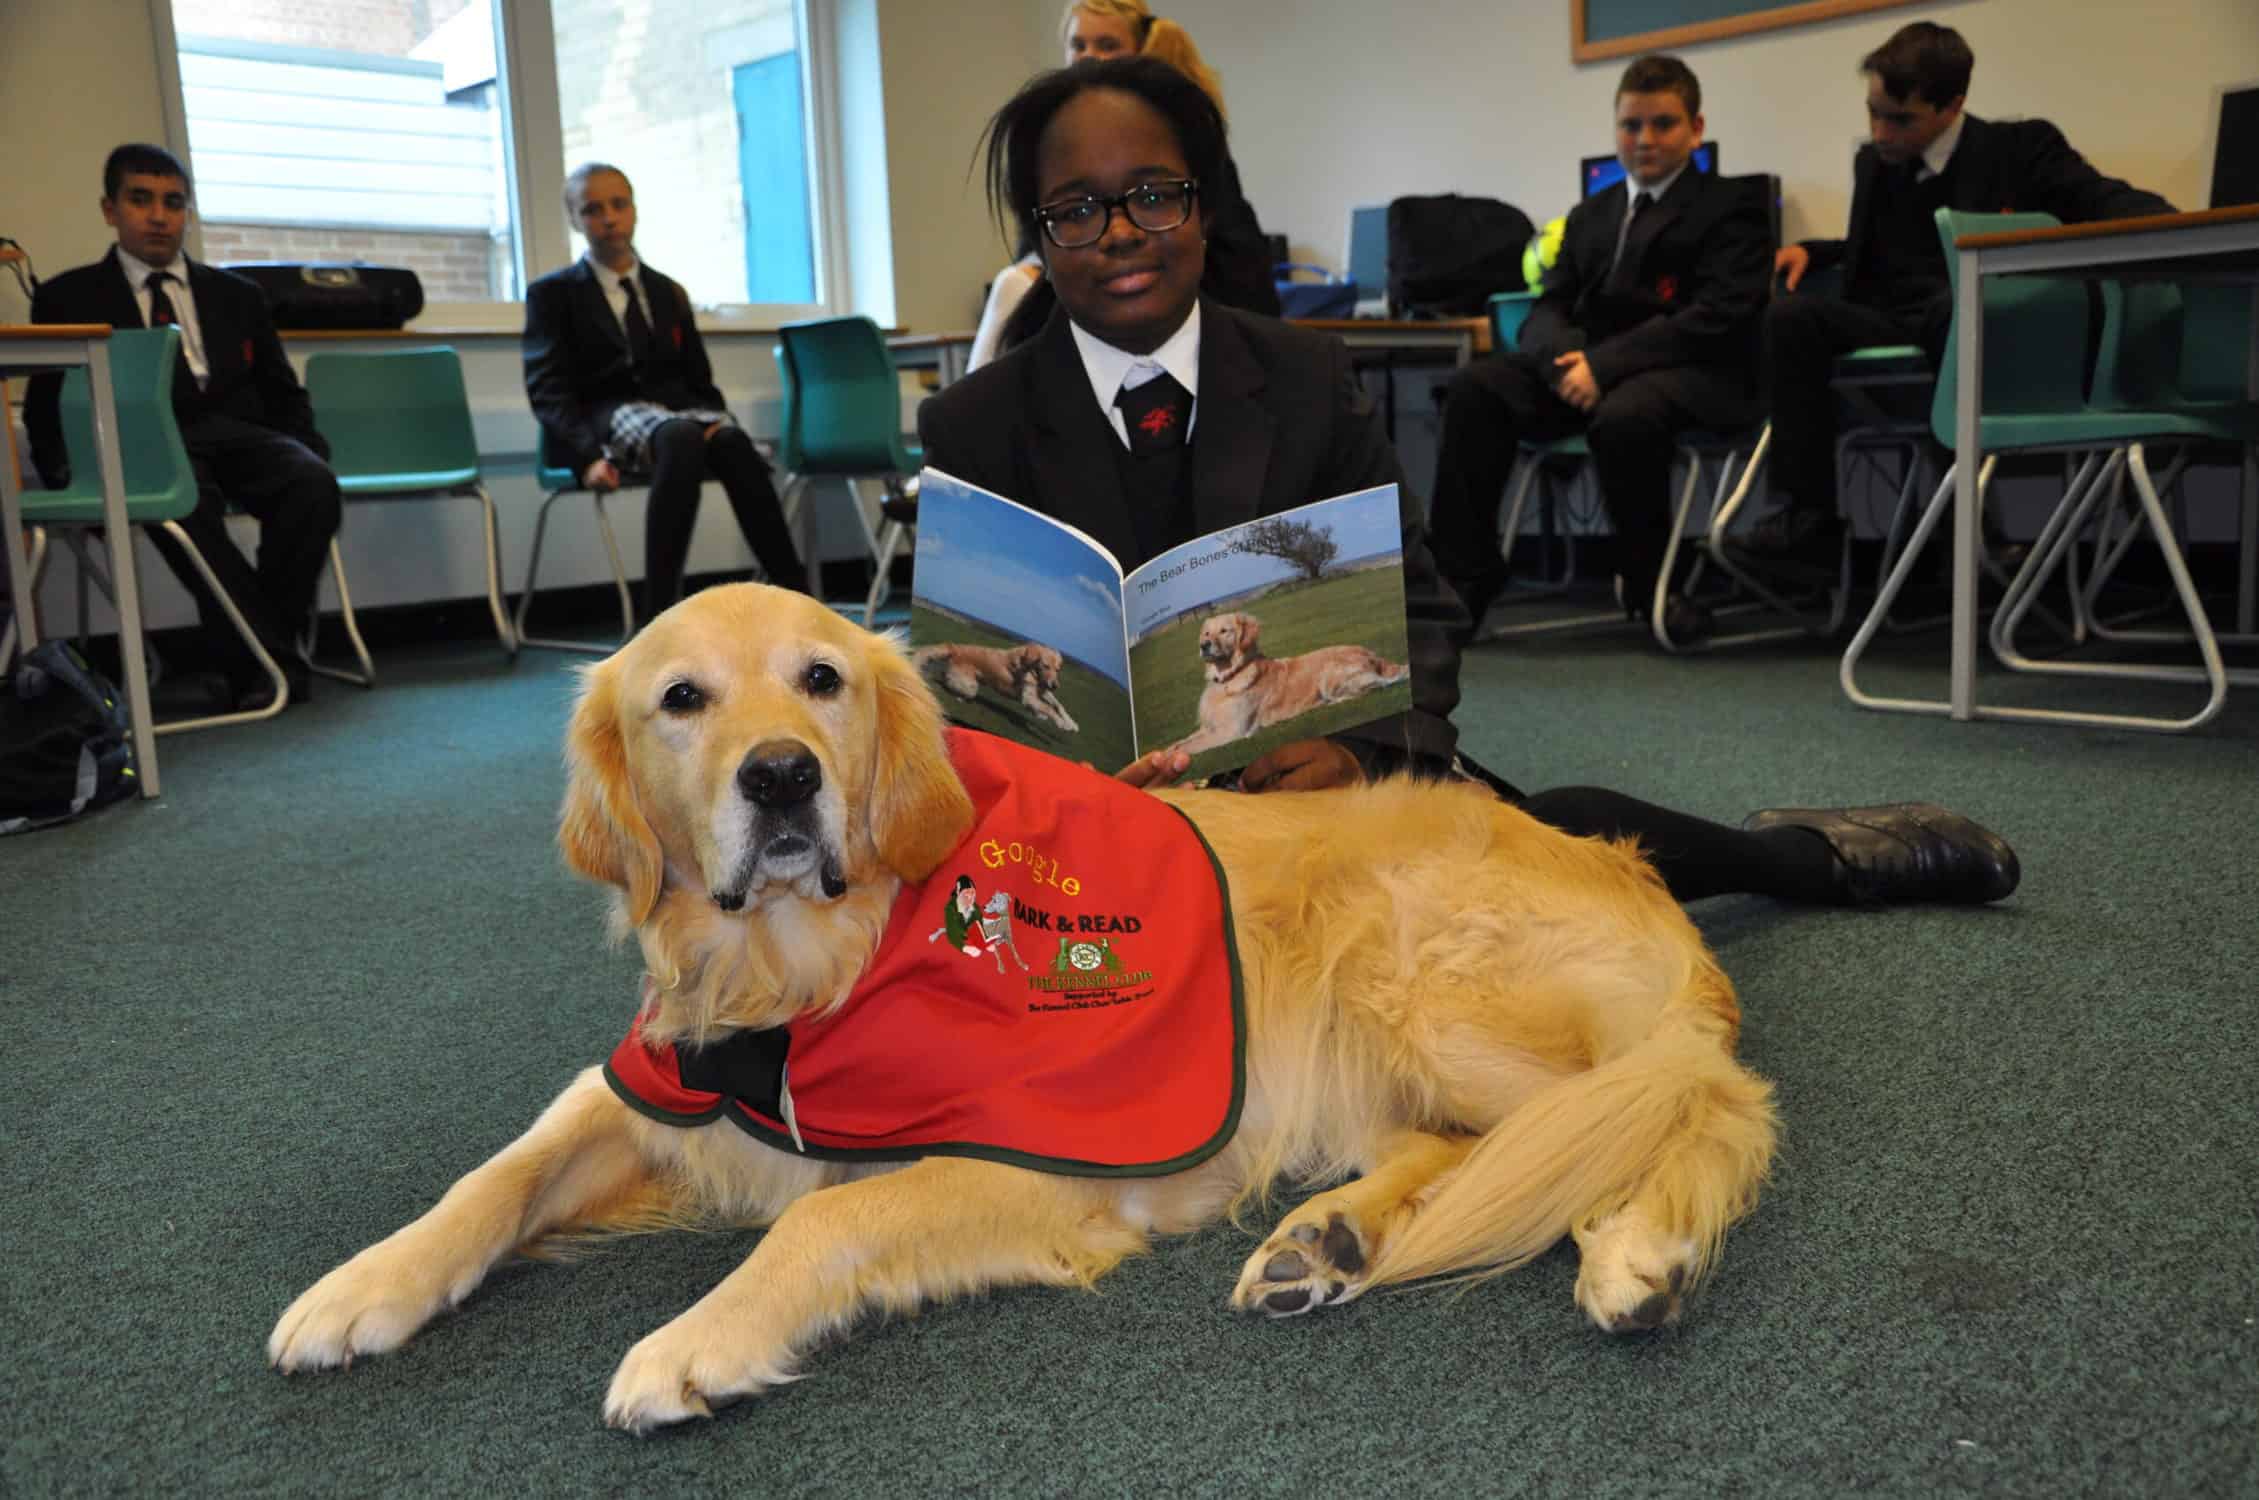 When kids read to dogs their reading and confidence is given a boost. The Kennel Club explains why they train dogs to read in schools to improve literacy programs.